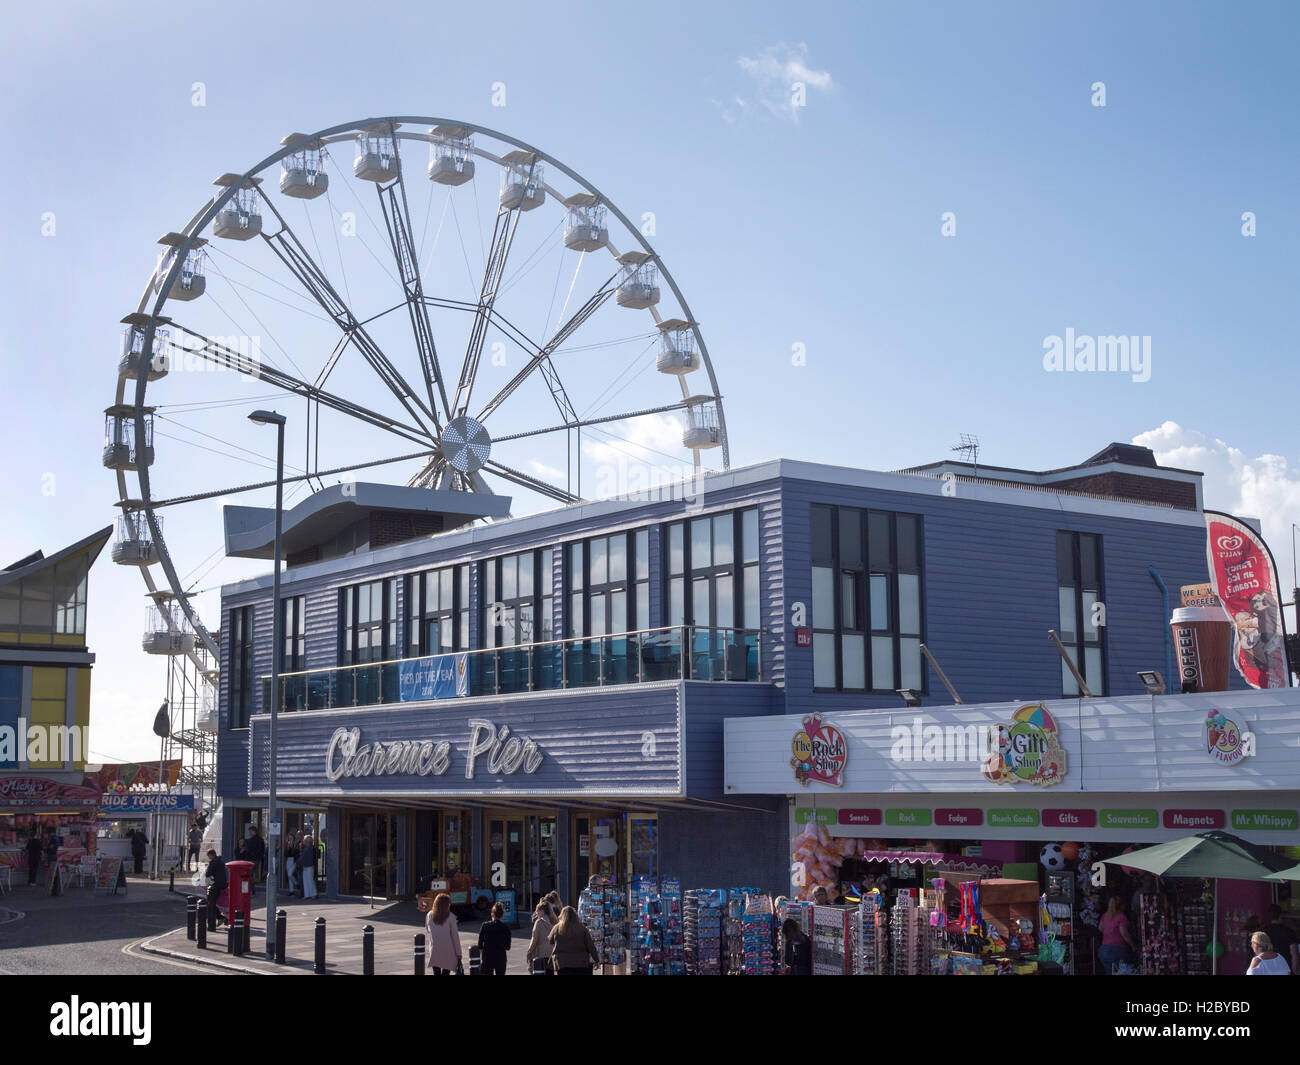 Clarence Pier, Southsea Seafront, Portsmouth, England, UK. Stock Photo